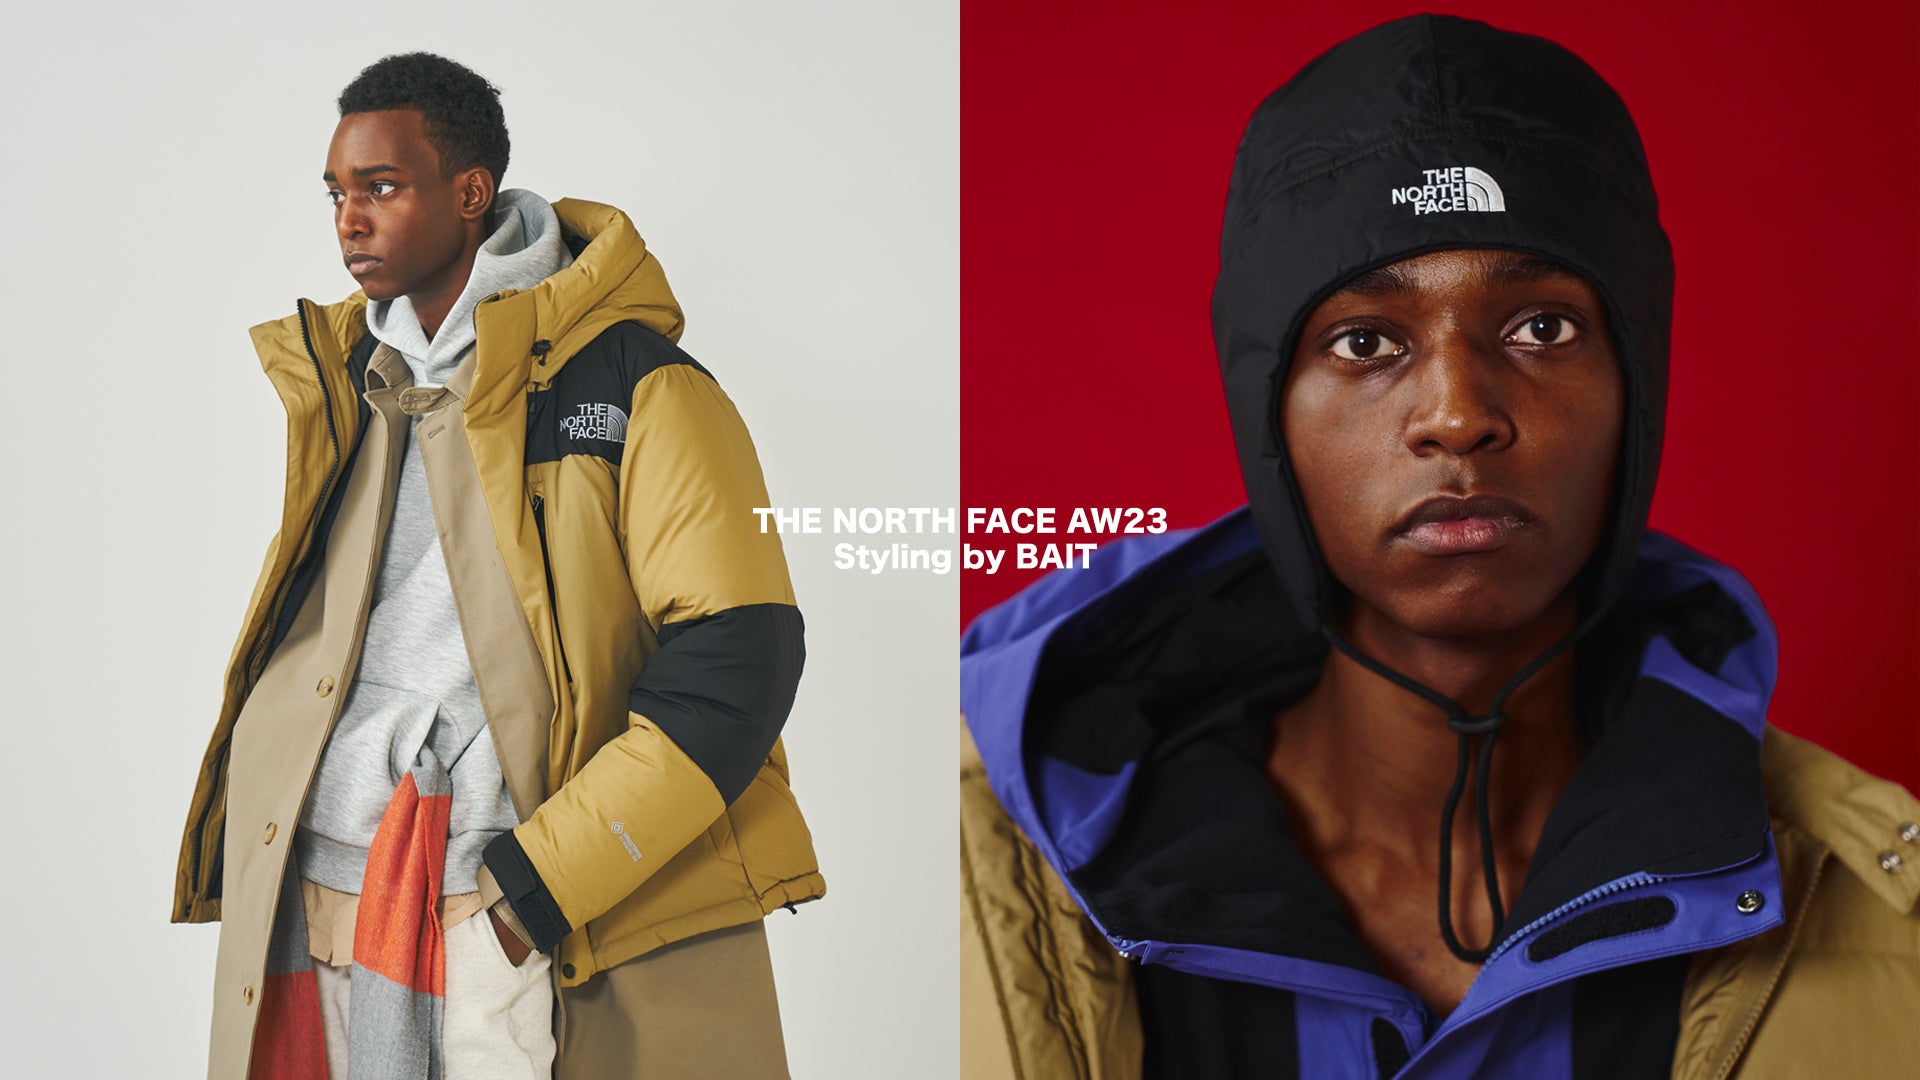 THE NORTH FACE AW23 Styling  by BAIT